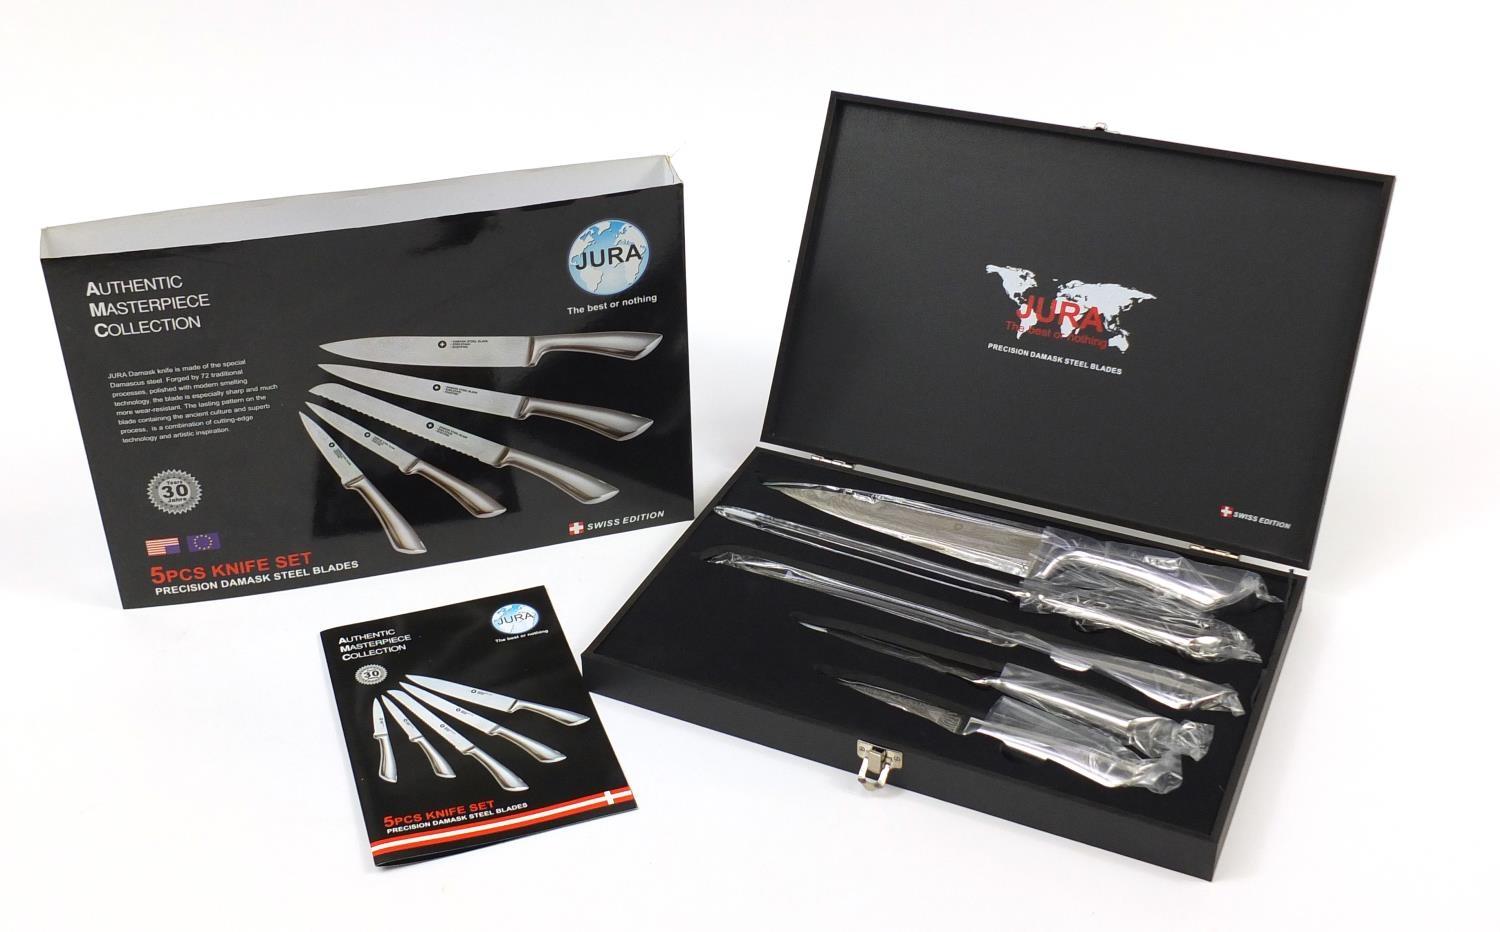 As new Jura Swiss five piece knife set with damask steel blades and fitted case : For Further